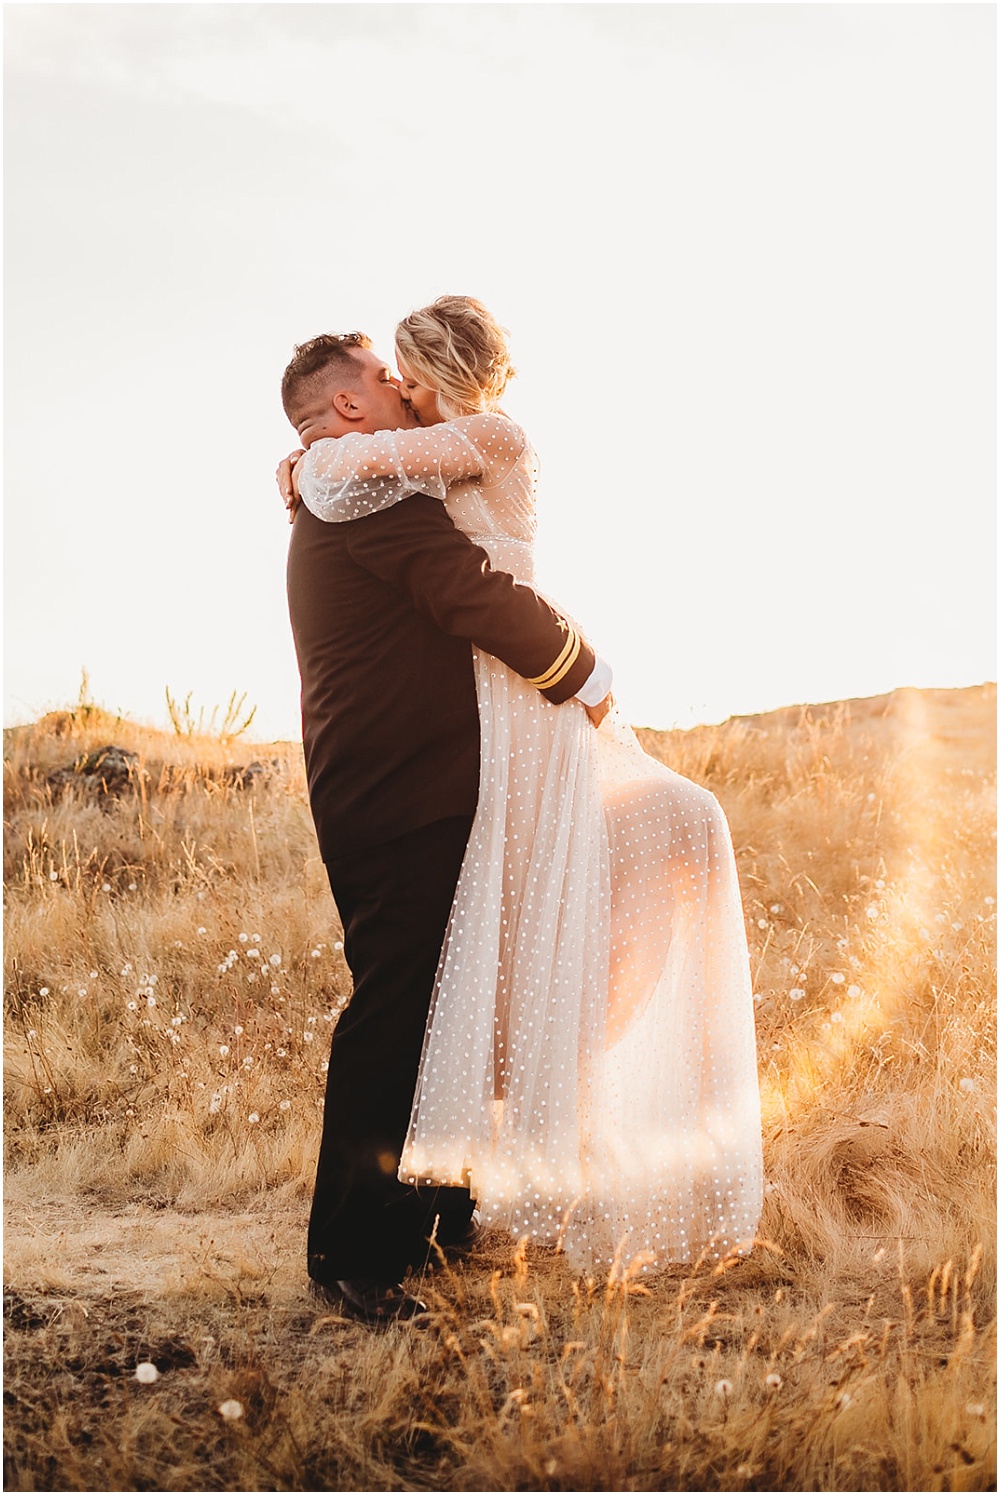 Bride and groom portraits at sunset